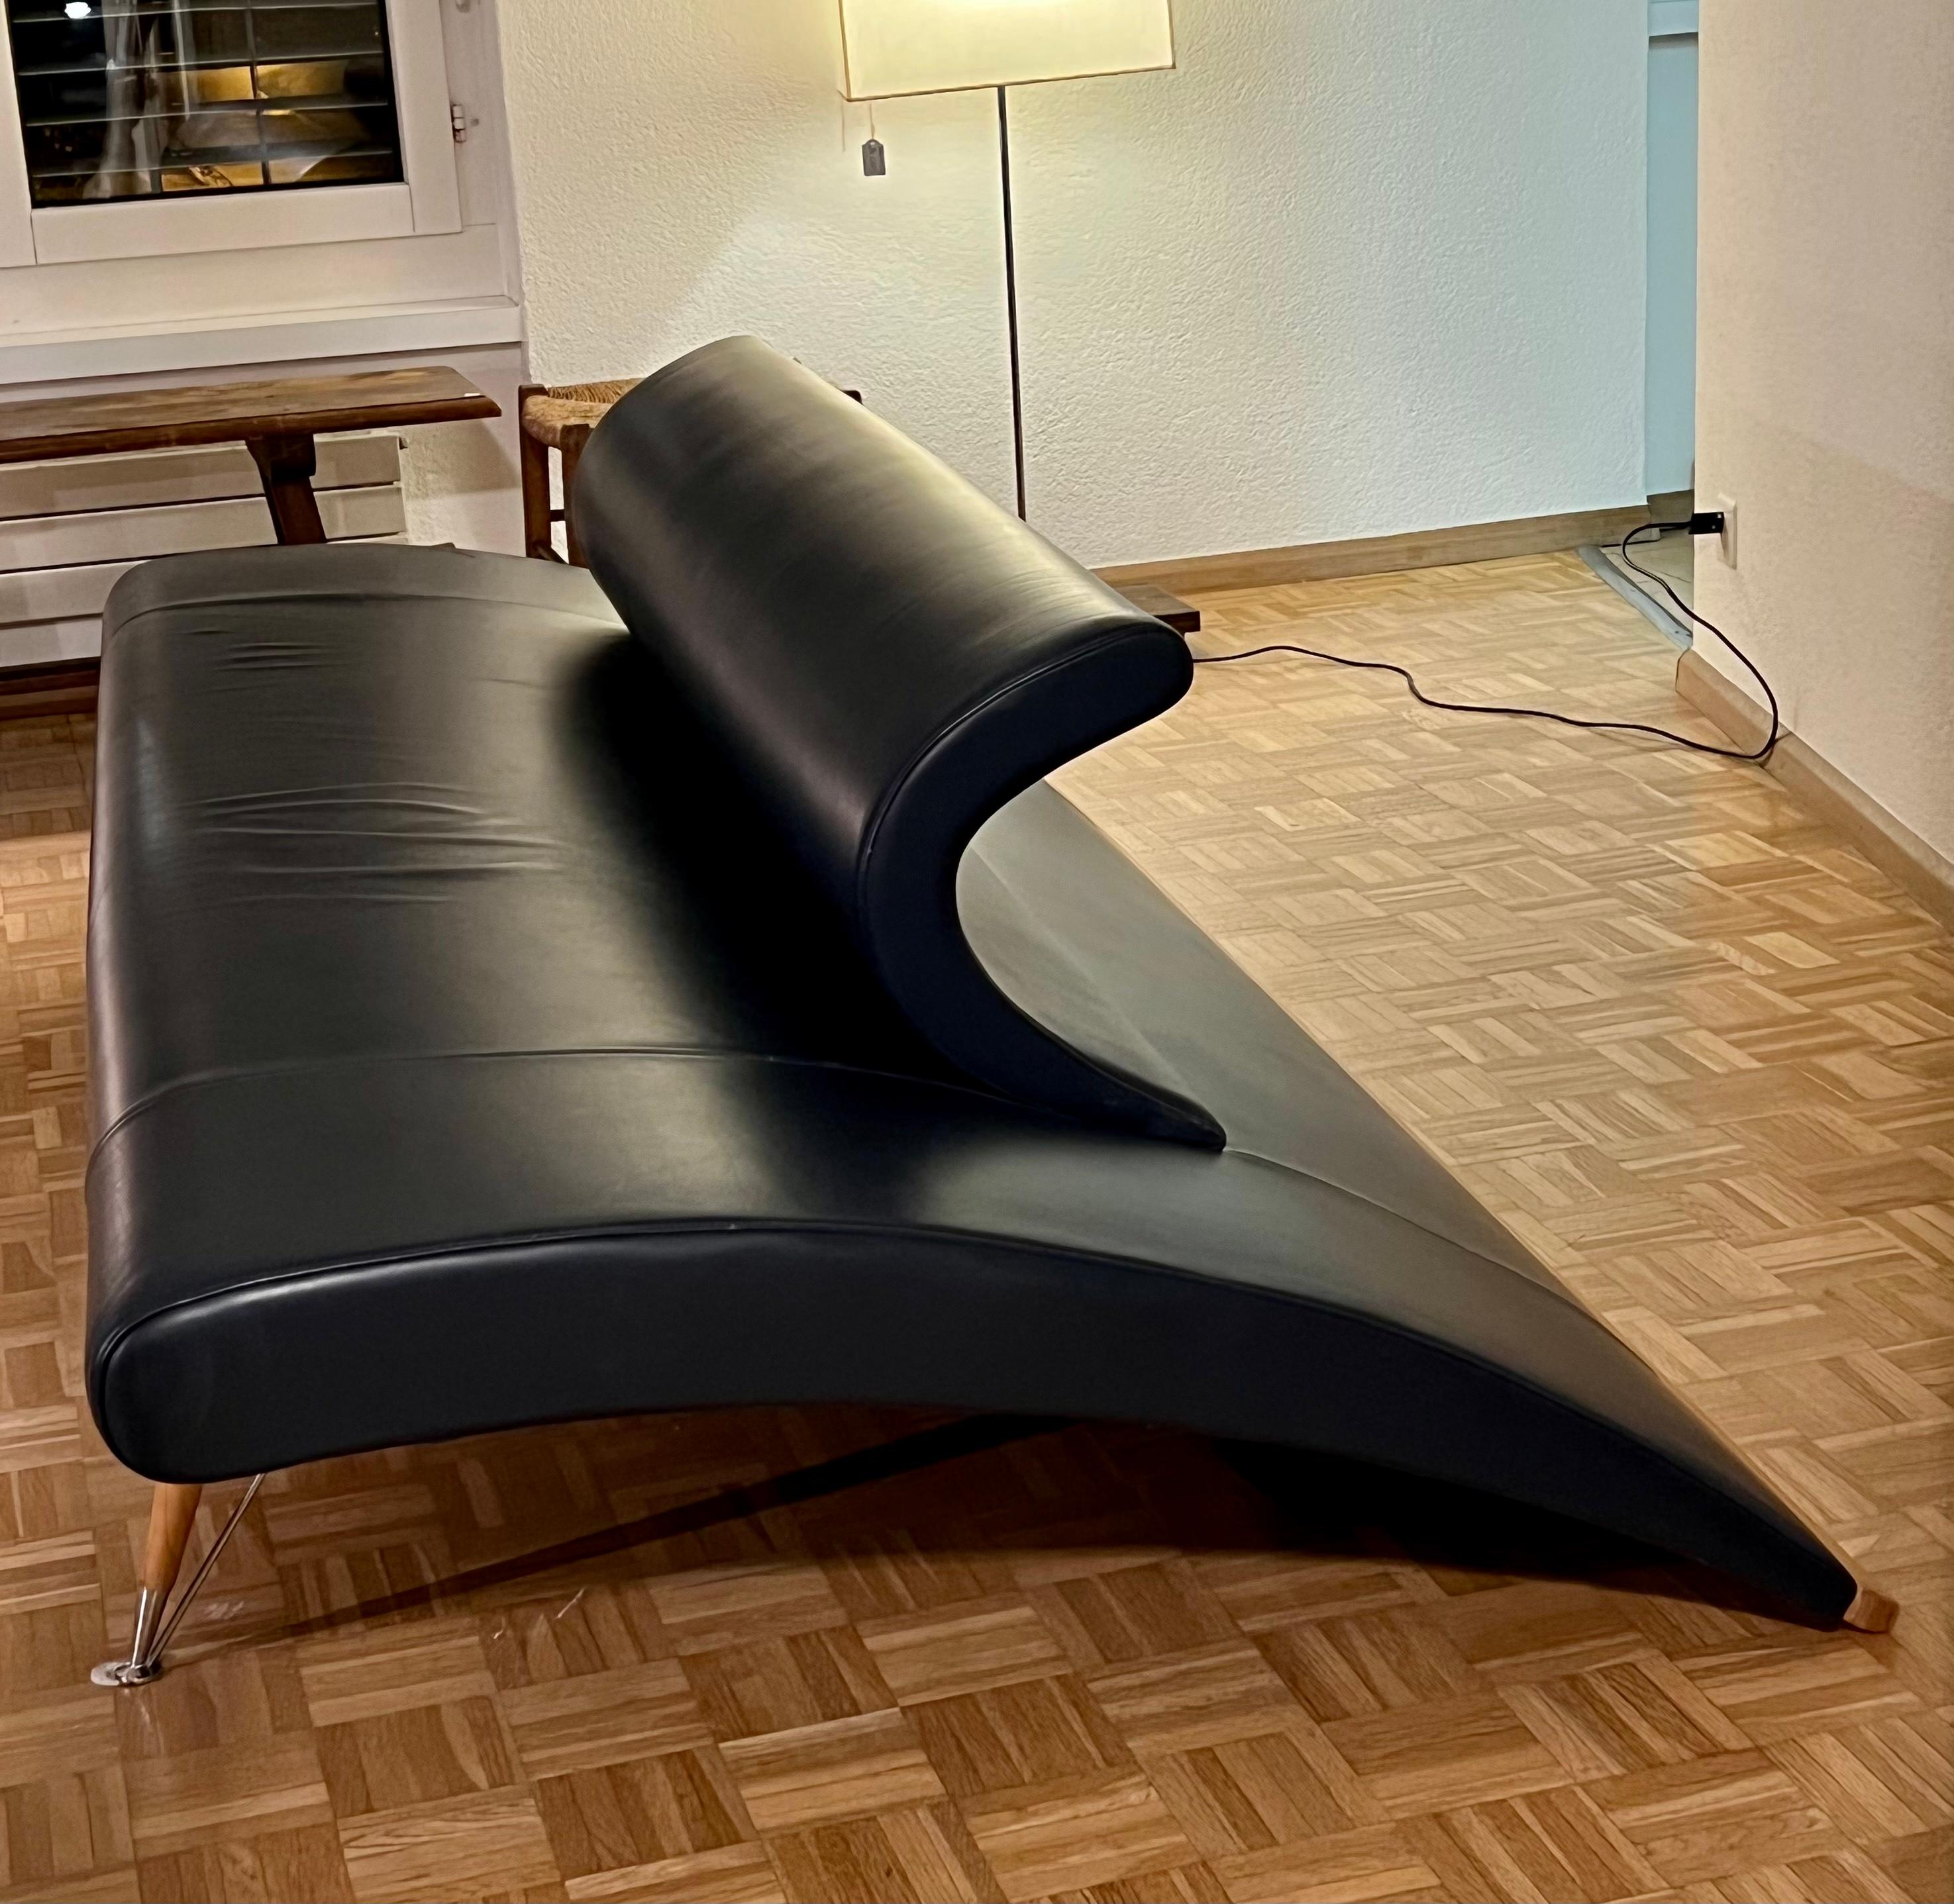 Massimo Iosa Ghiniss sofa Vertigo is a very rare and unike piece of furniture. Ideal for a large room, where it has space enough to Unfold it’s aerodynamic inspired design, and can be watched and admired from all angels. Inspired by the influences